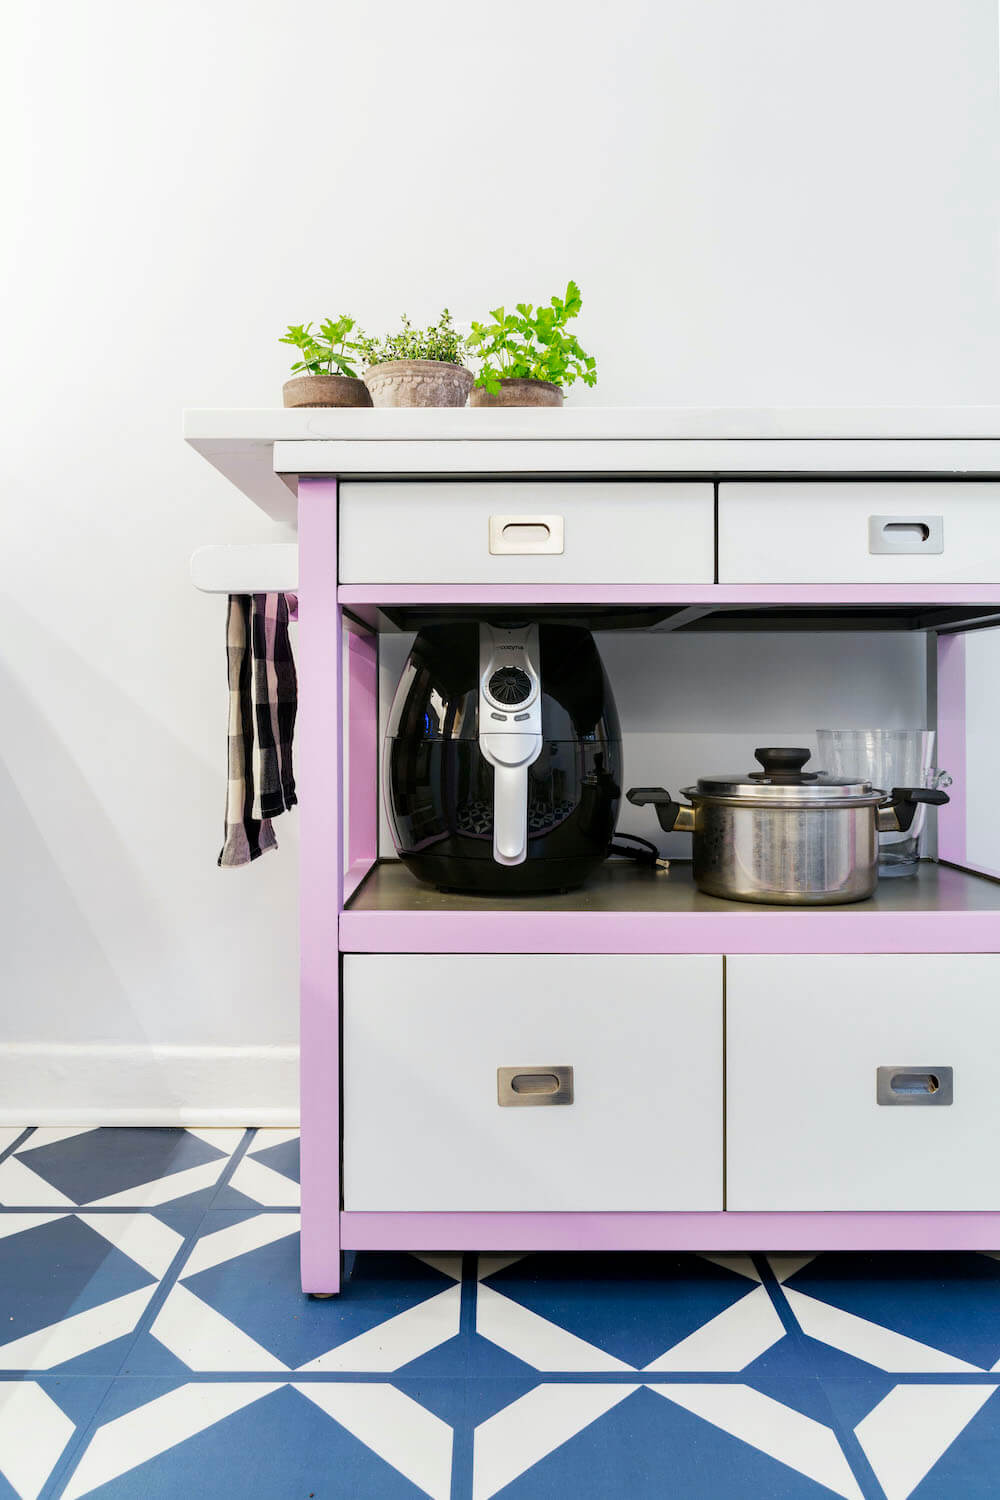 Image of a small kitchen island painted purple